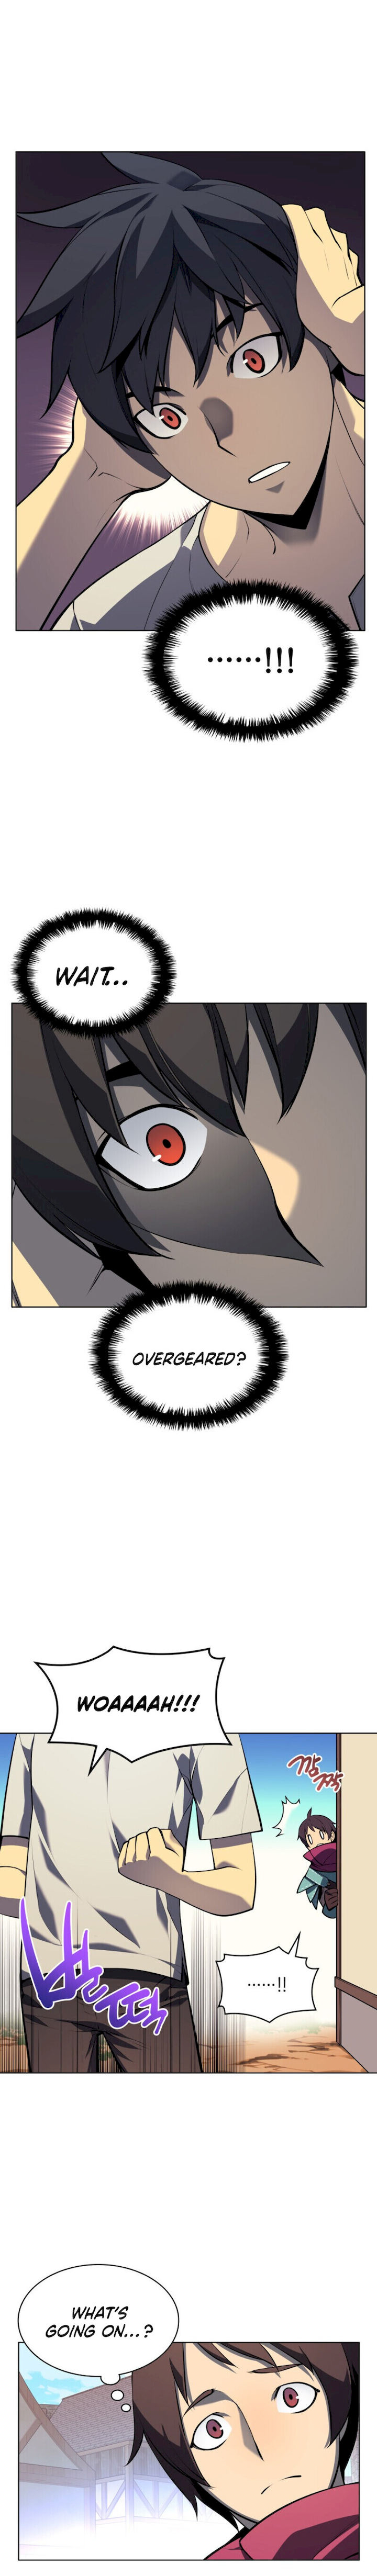 Overgeared (Team Argo) - Chapter 36 Page 19